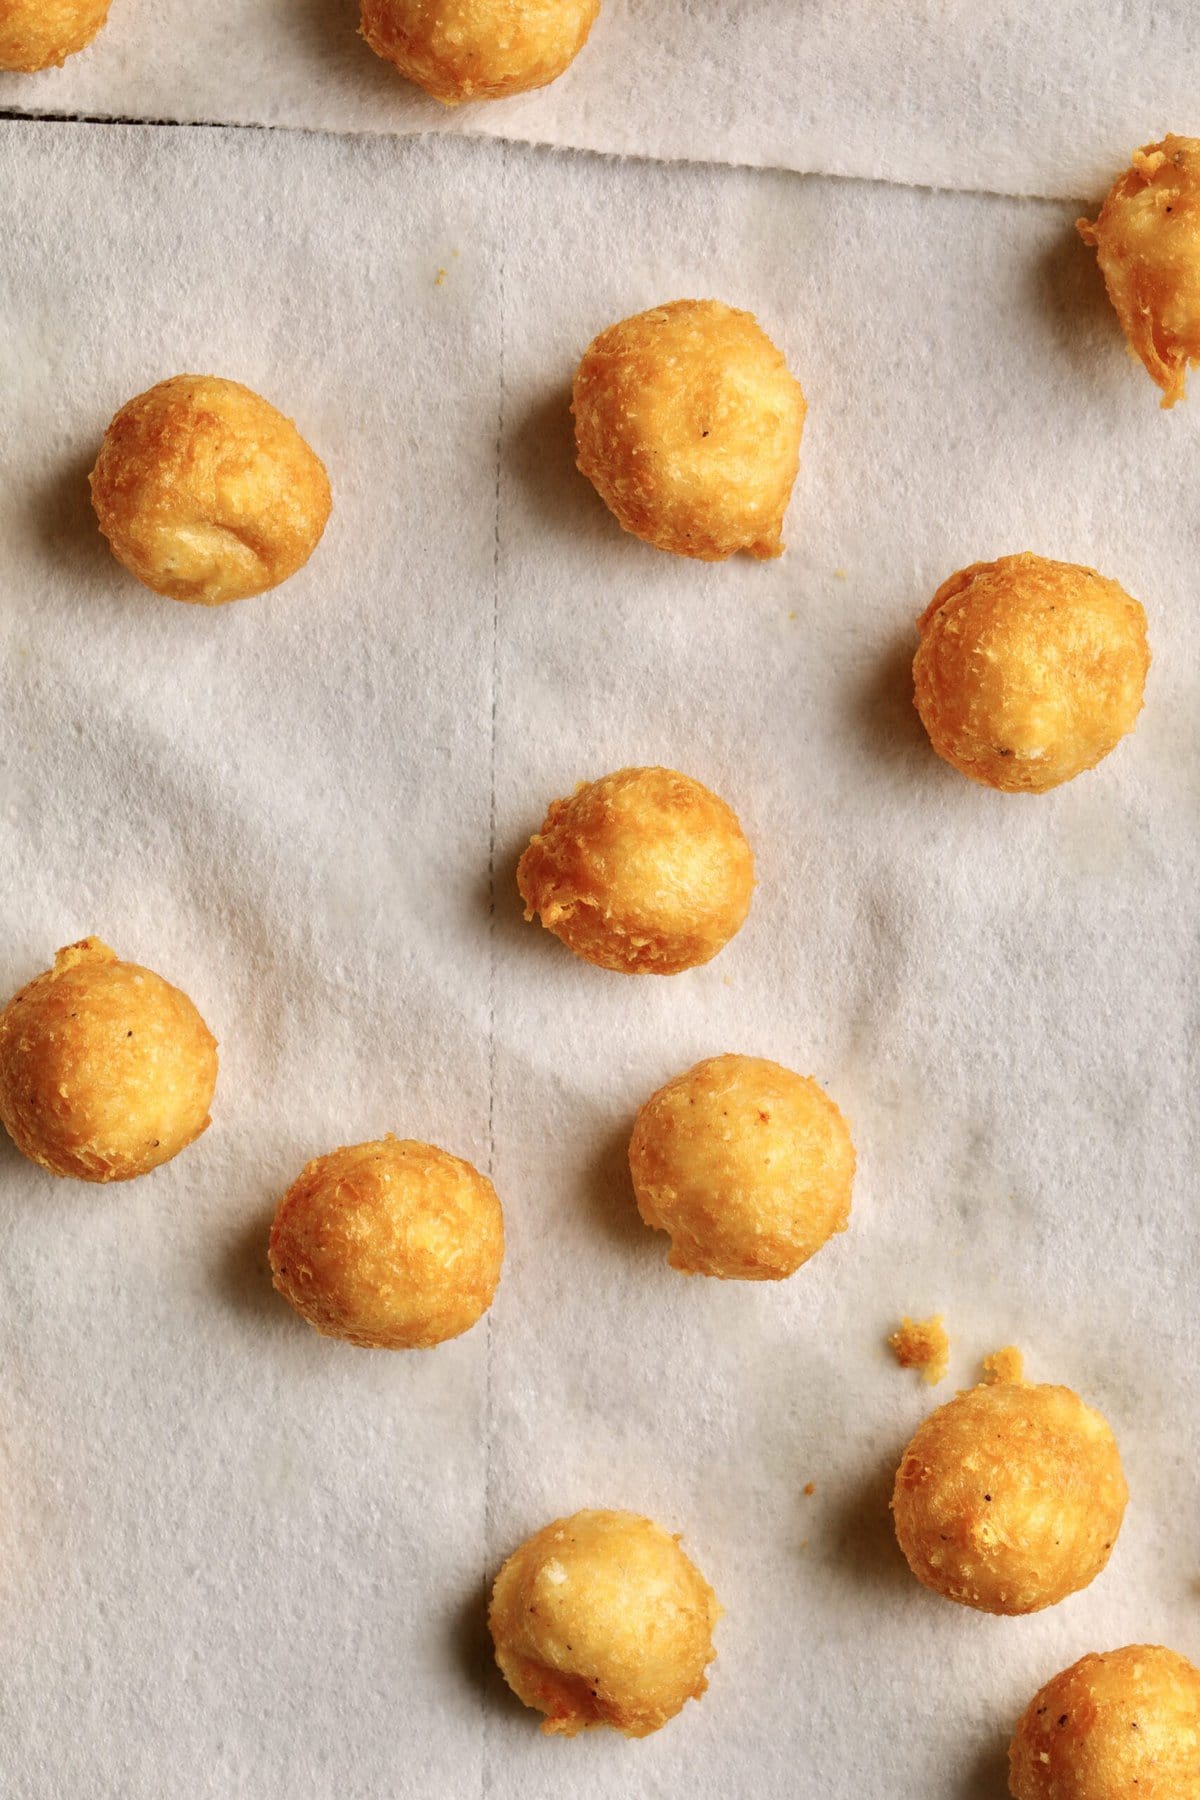 Process for making fried cheese balls-letting cheese balls rest on paper towels to absorb excess oil.